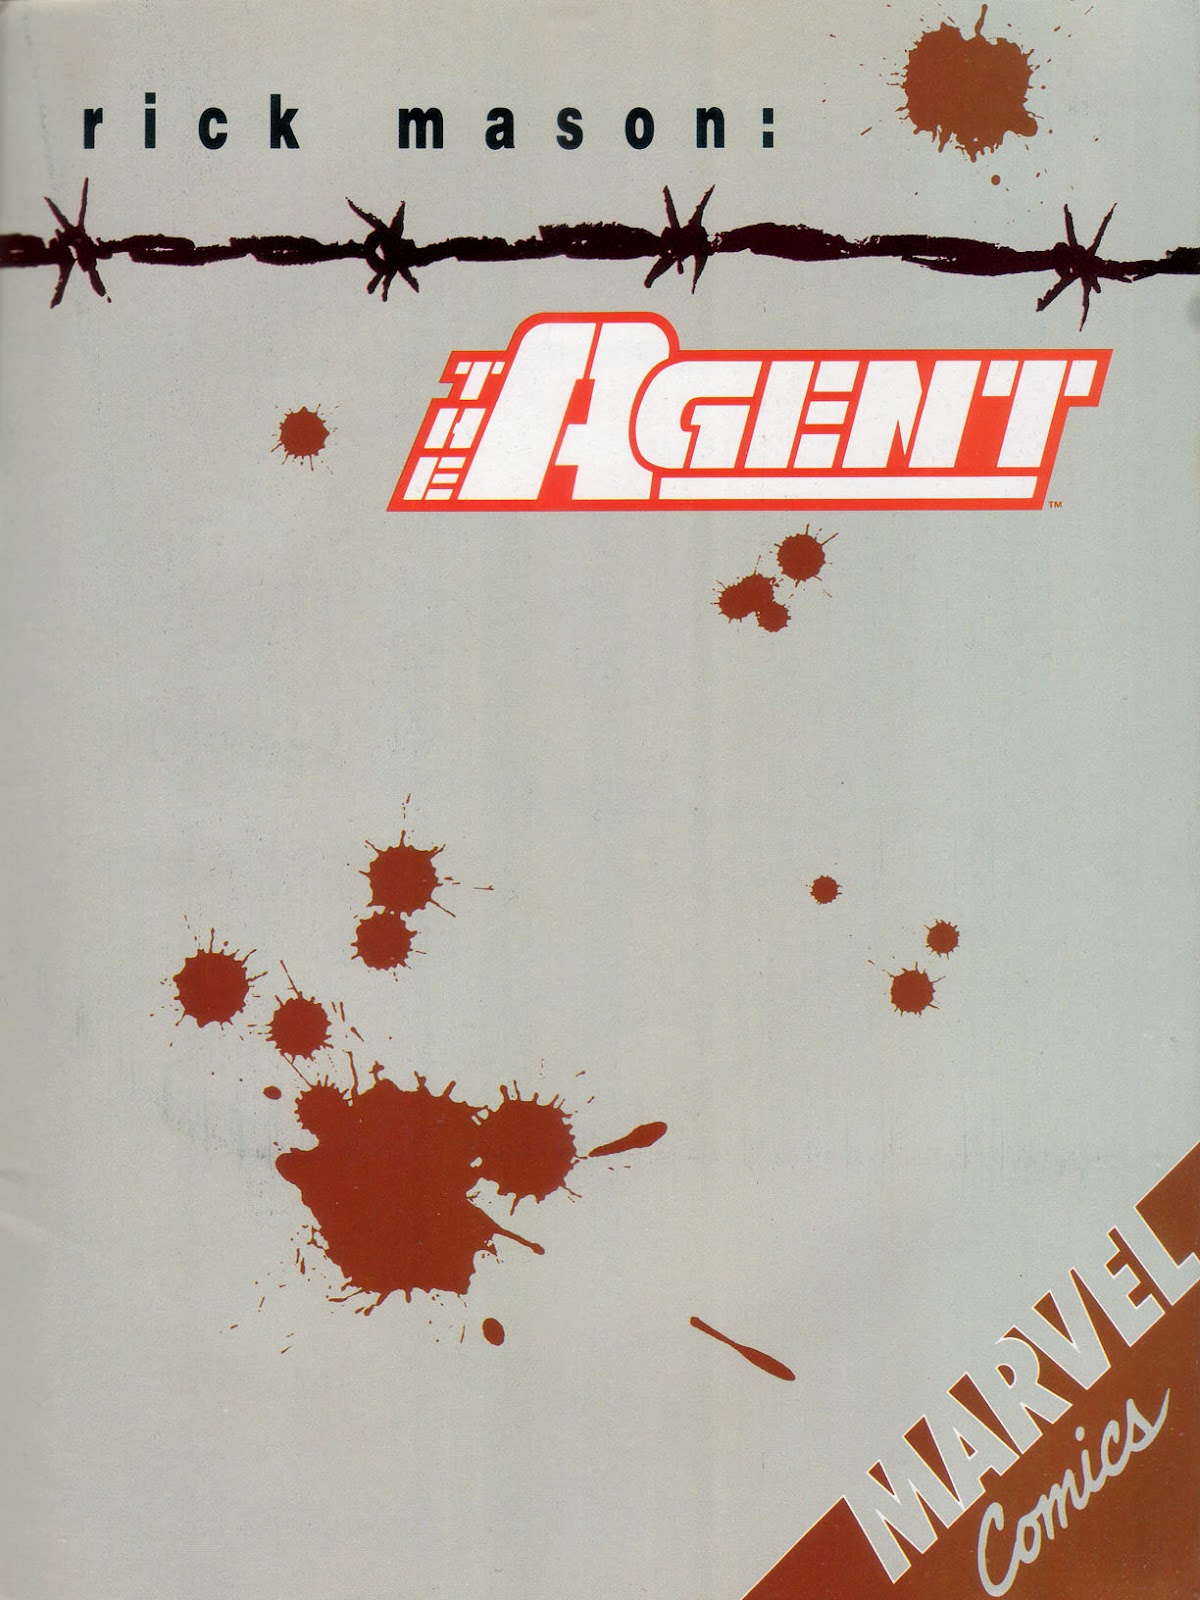 Marvel Graphic Novel issue 57 - Rick Mason - The Agent - Page 3